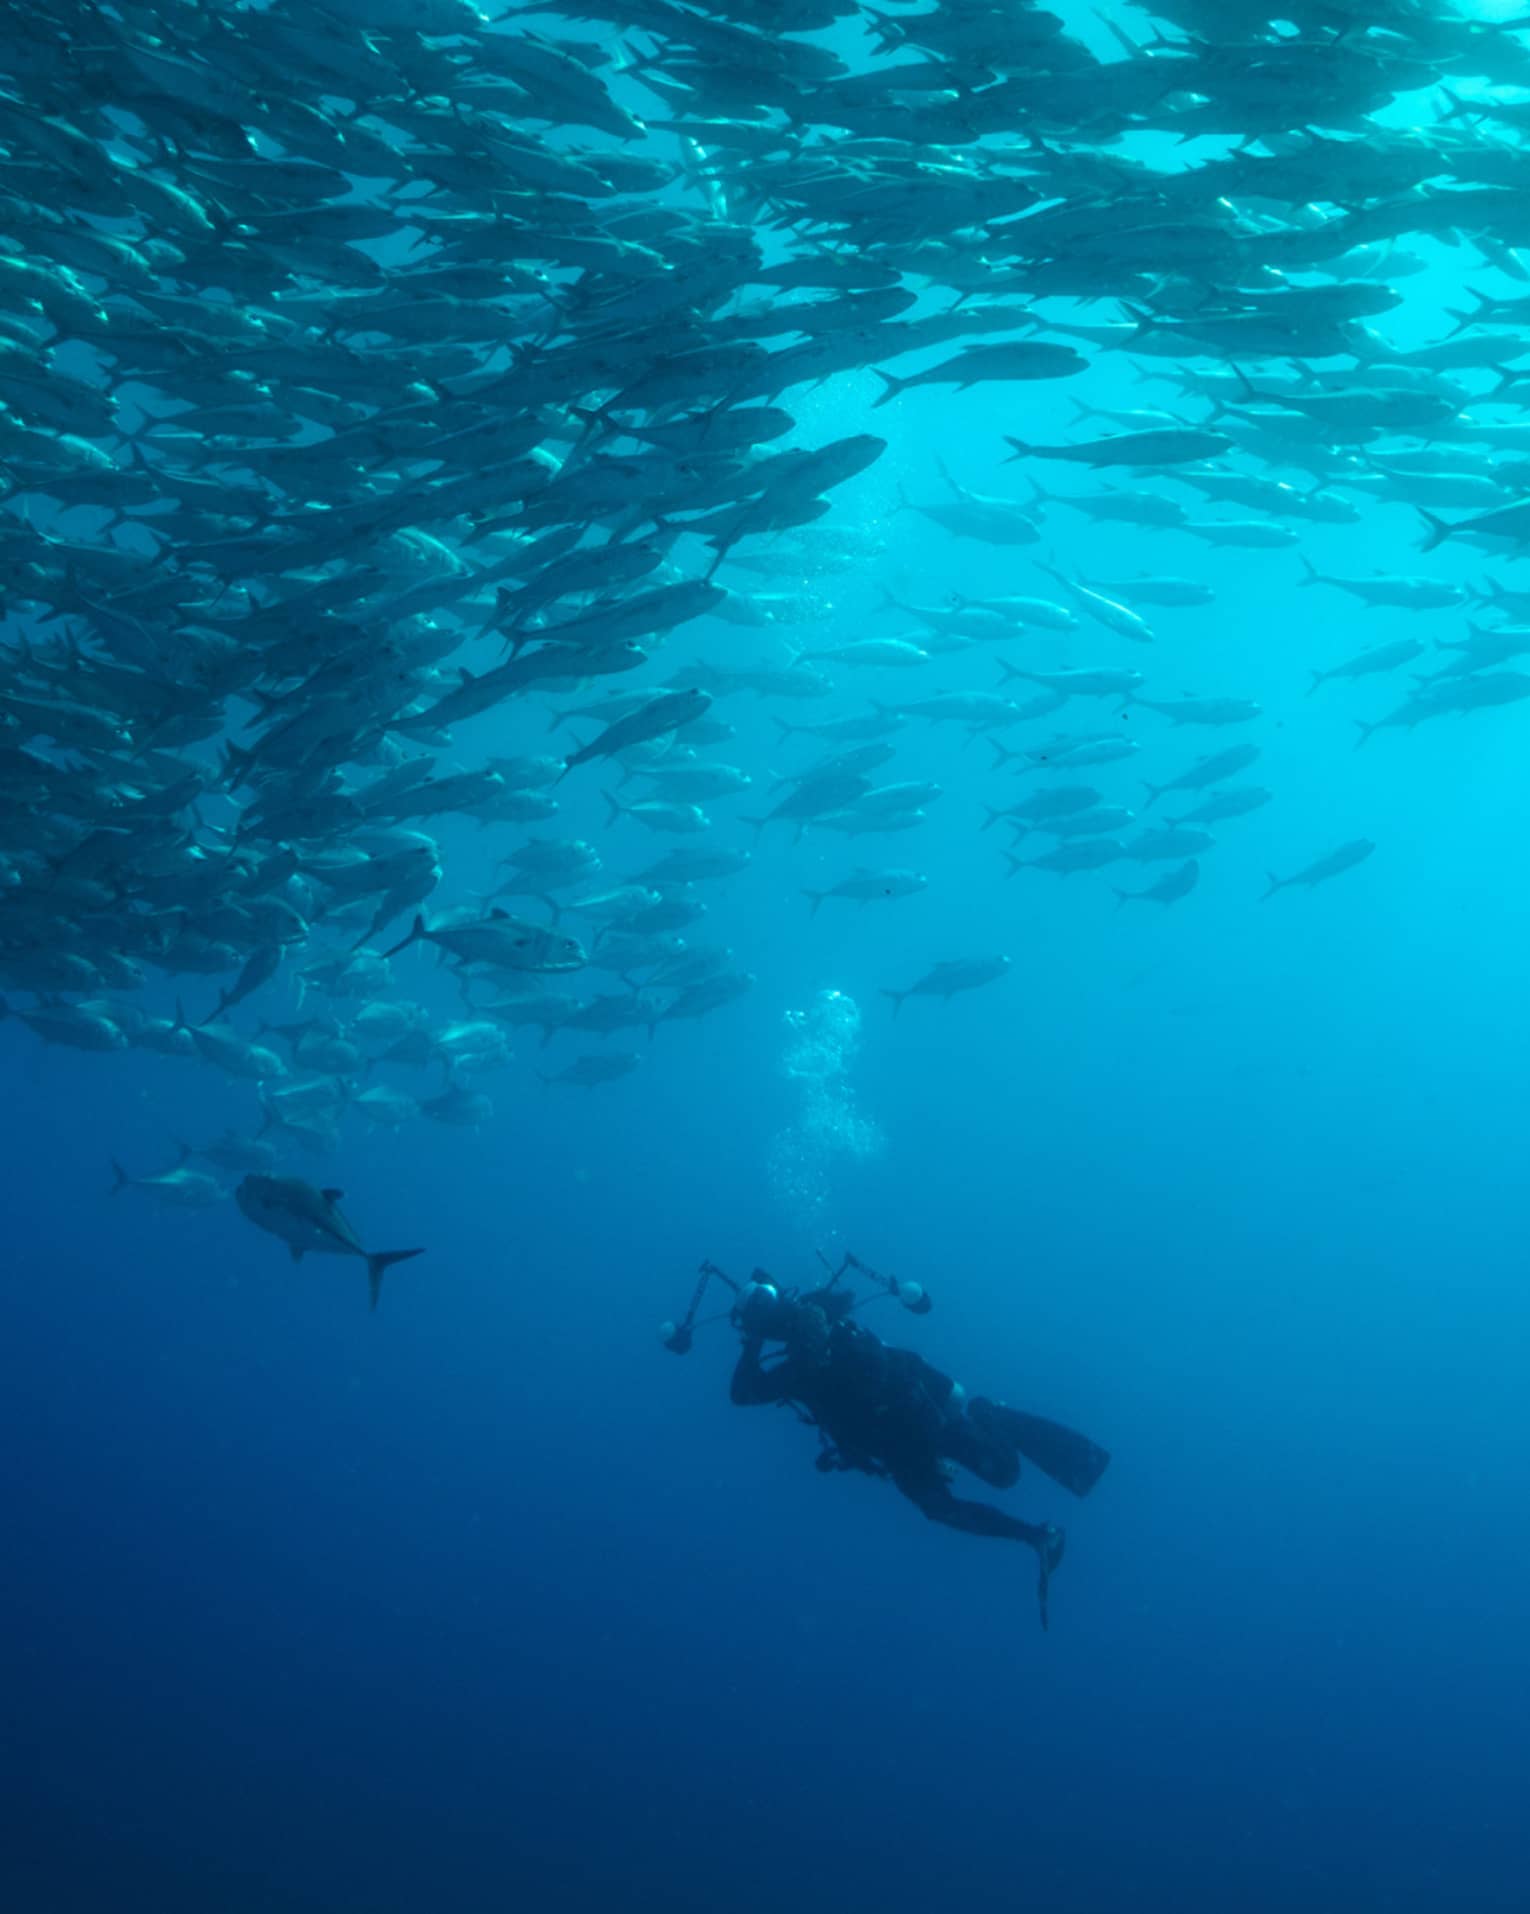 A person scuba diving inn the ocean with hundreds of fish swimming around them.